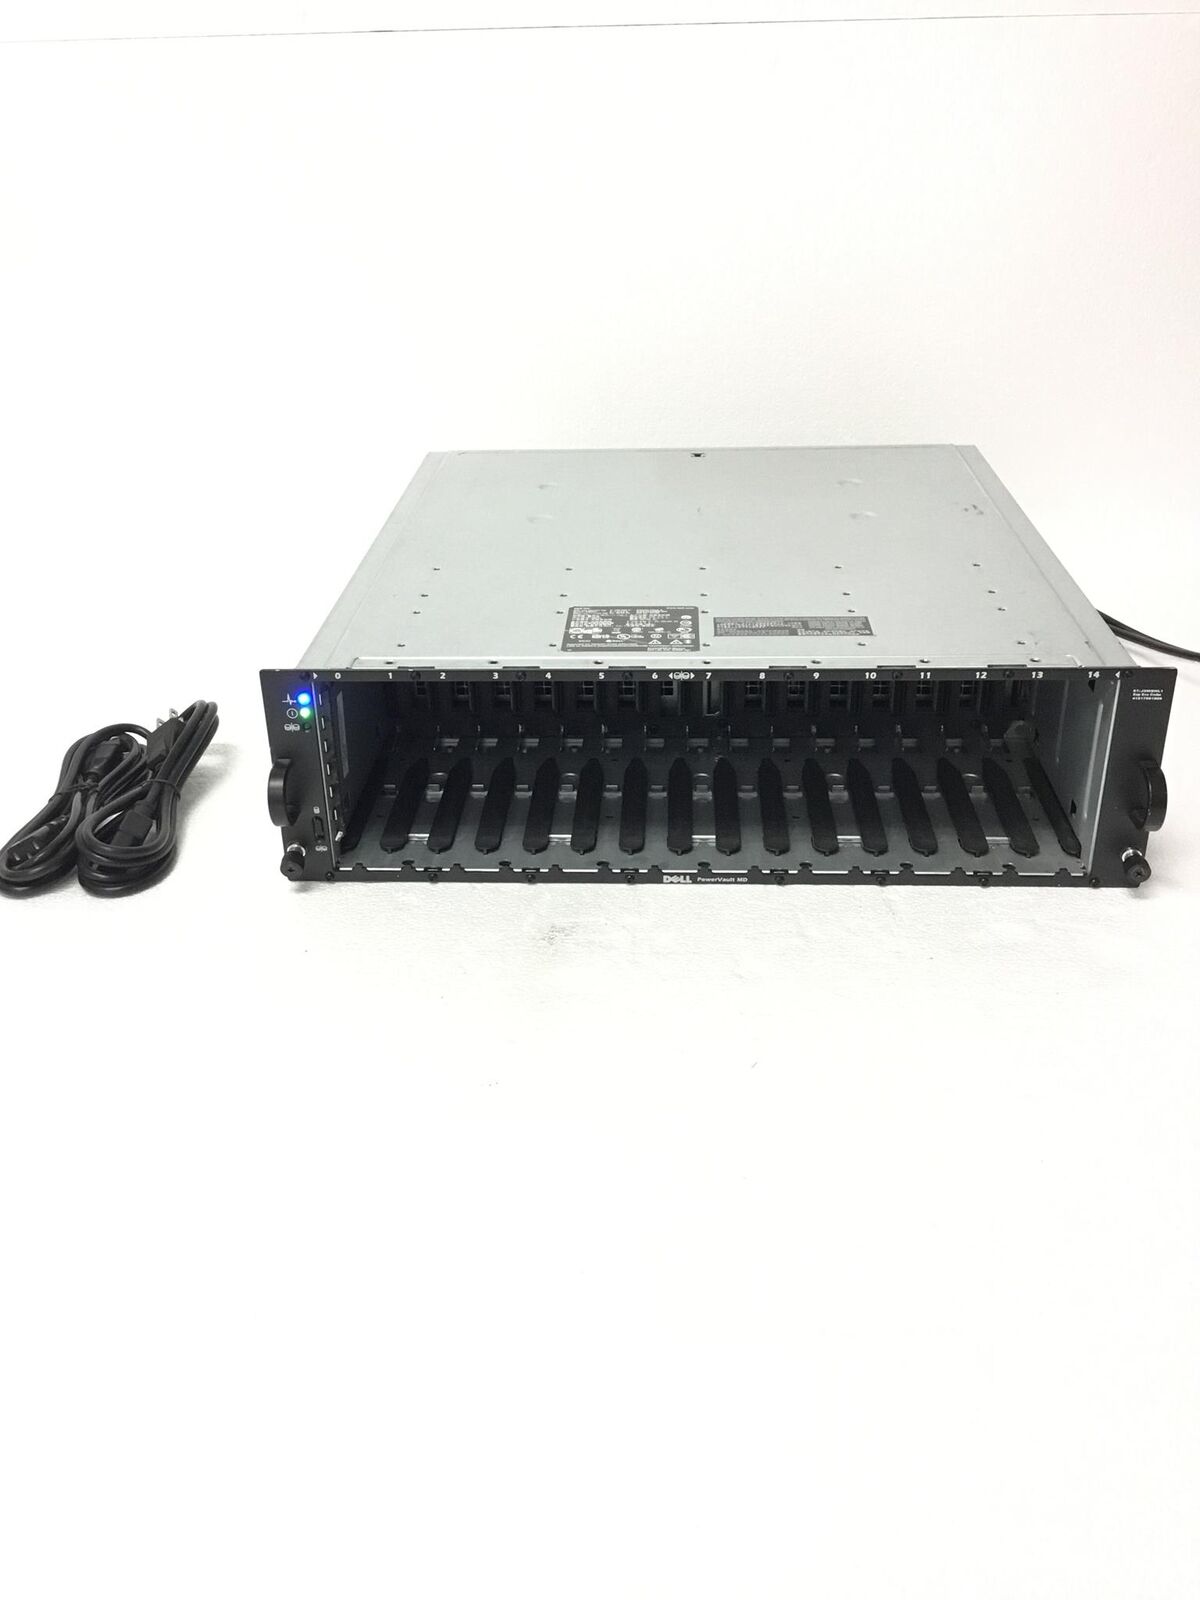 DELL Power Vault Md AMP01 SAS Storage Array w/2x488W PS/2xCards AMP01-Sim NO HDD